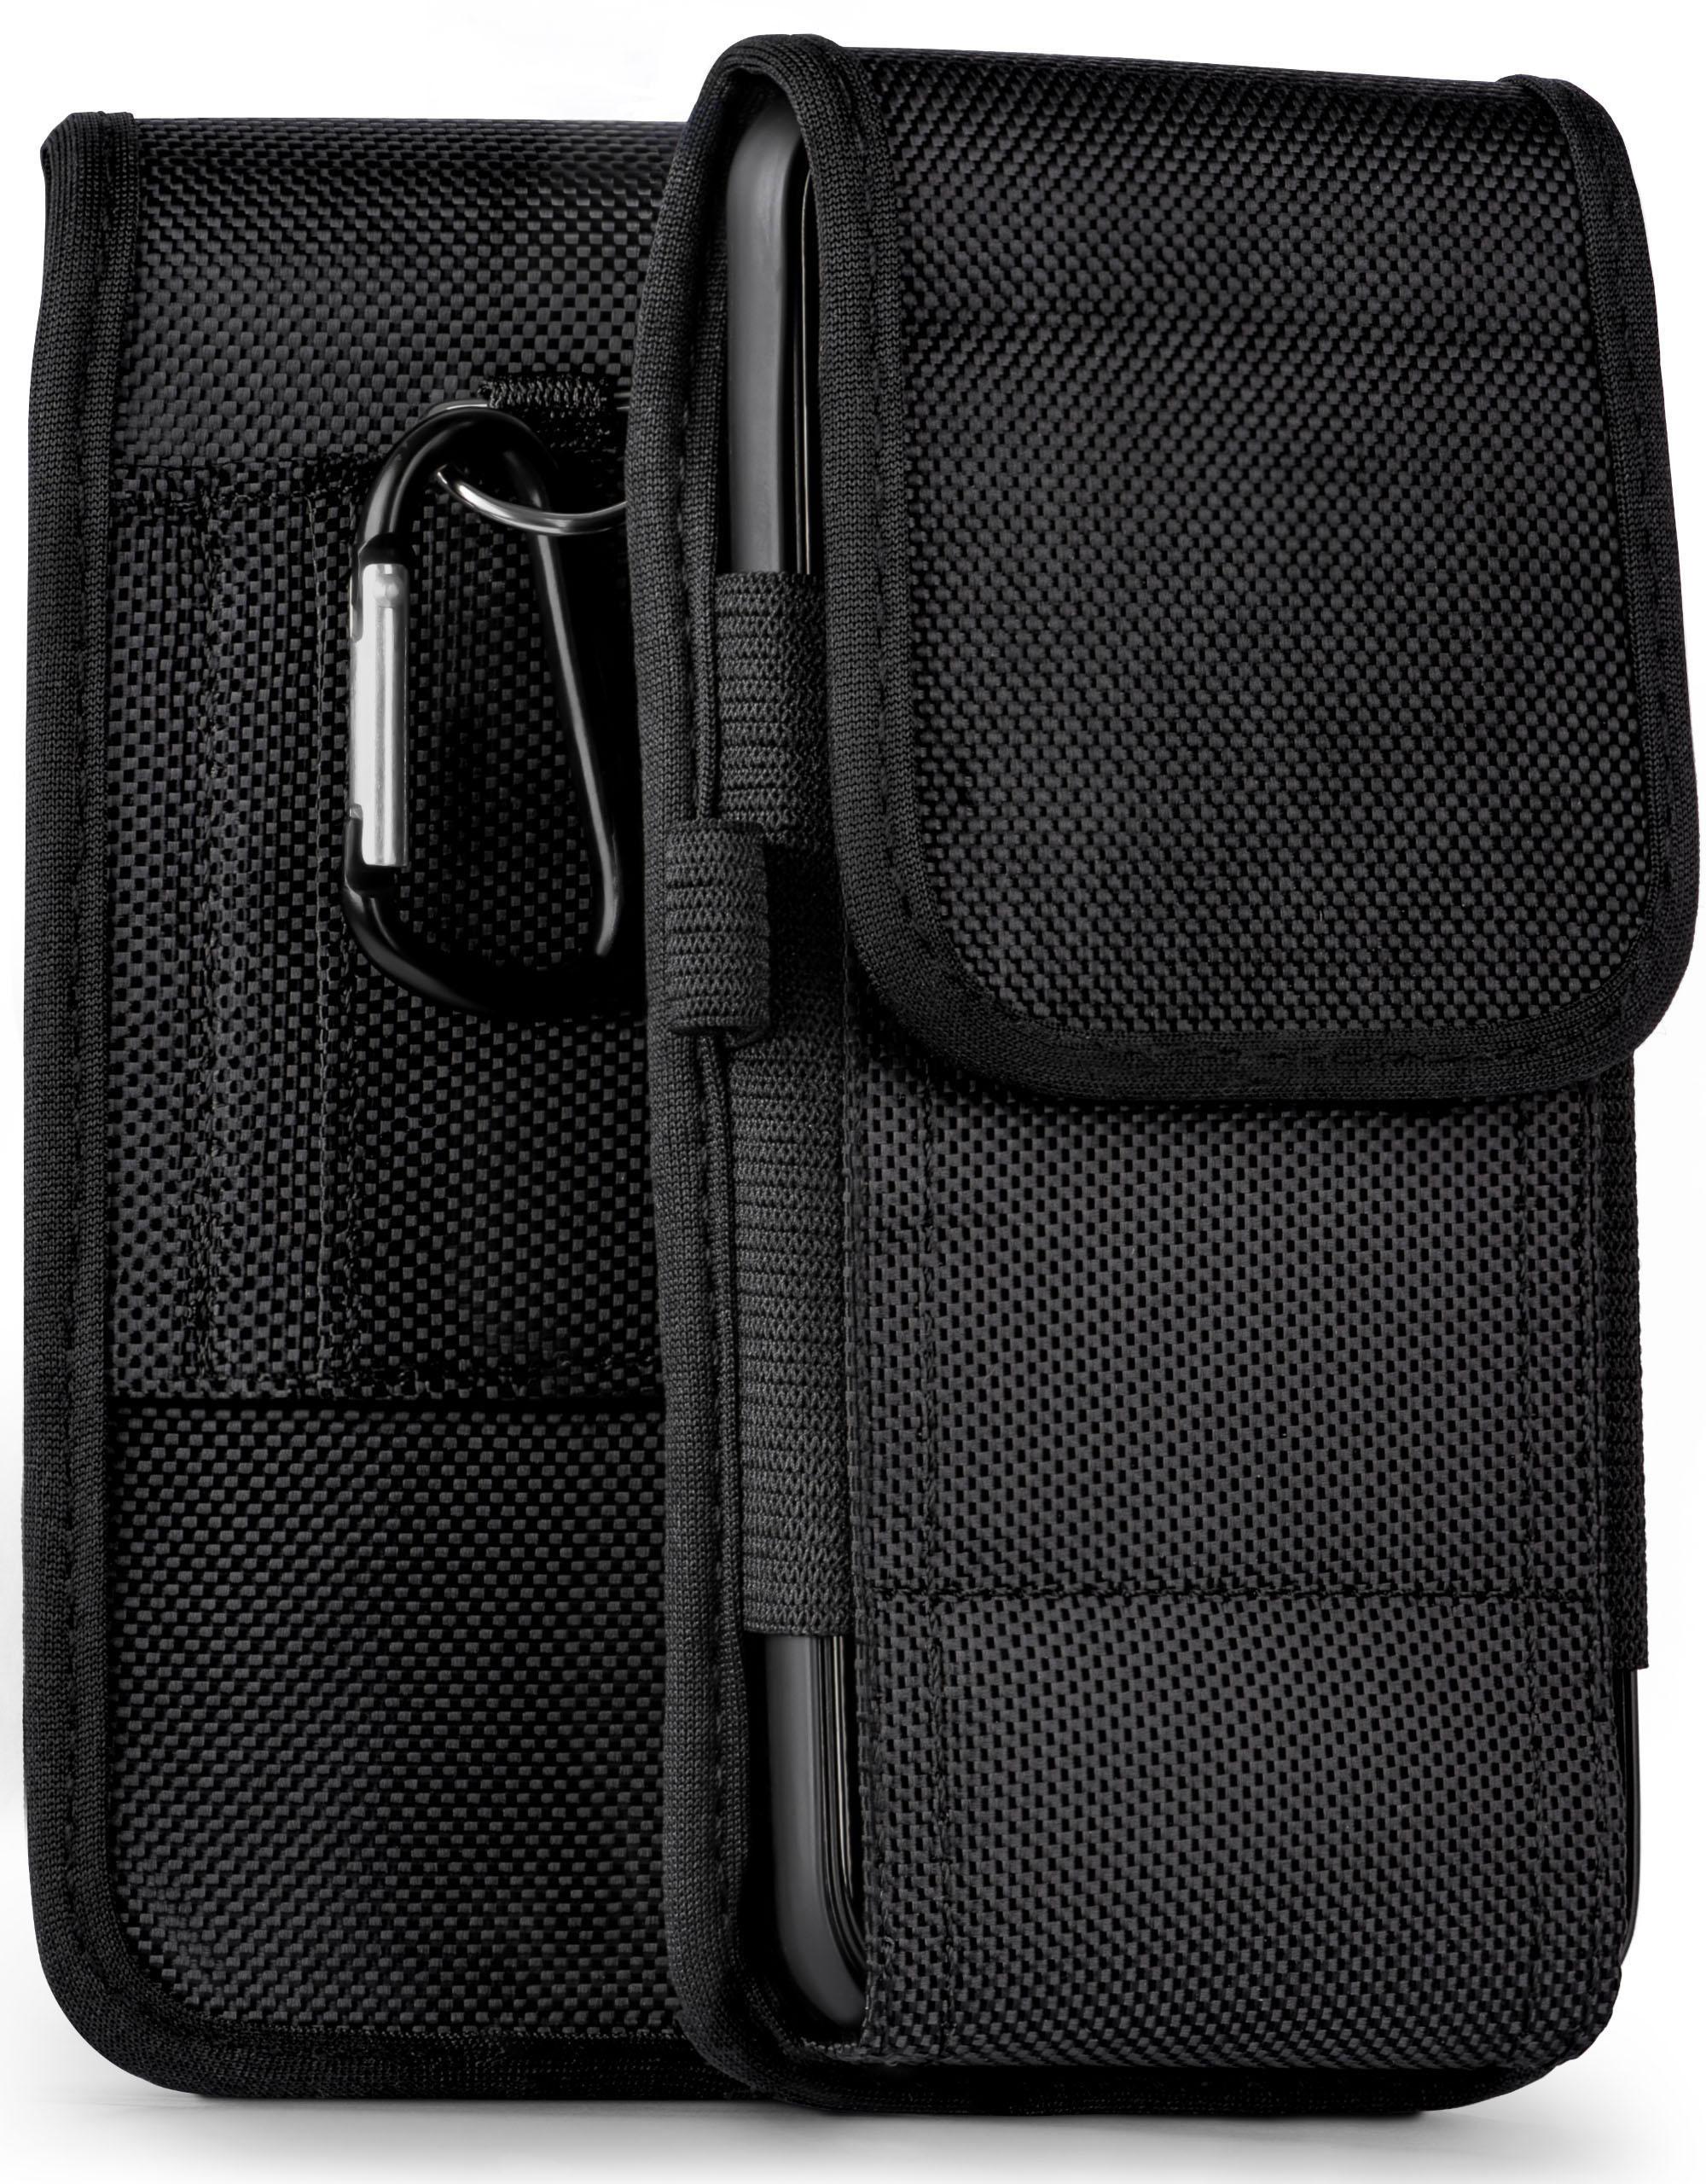 Agility OnePlus, Holster, Case, MOEX Trail 3T,